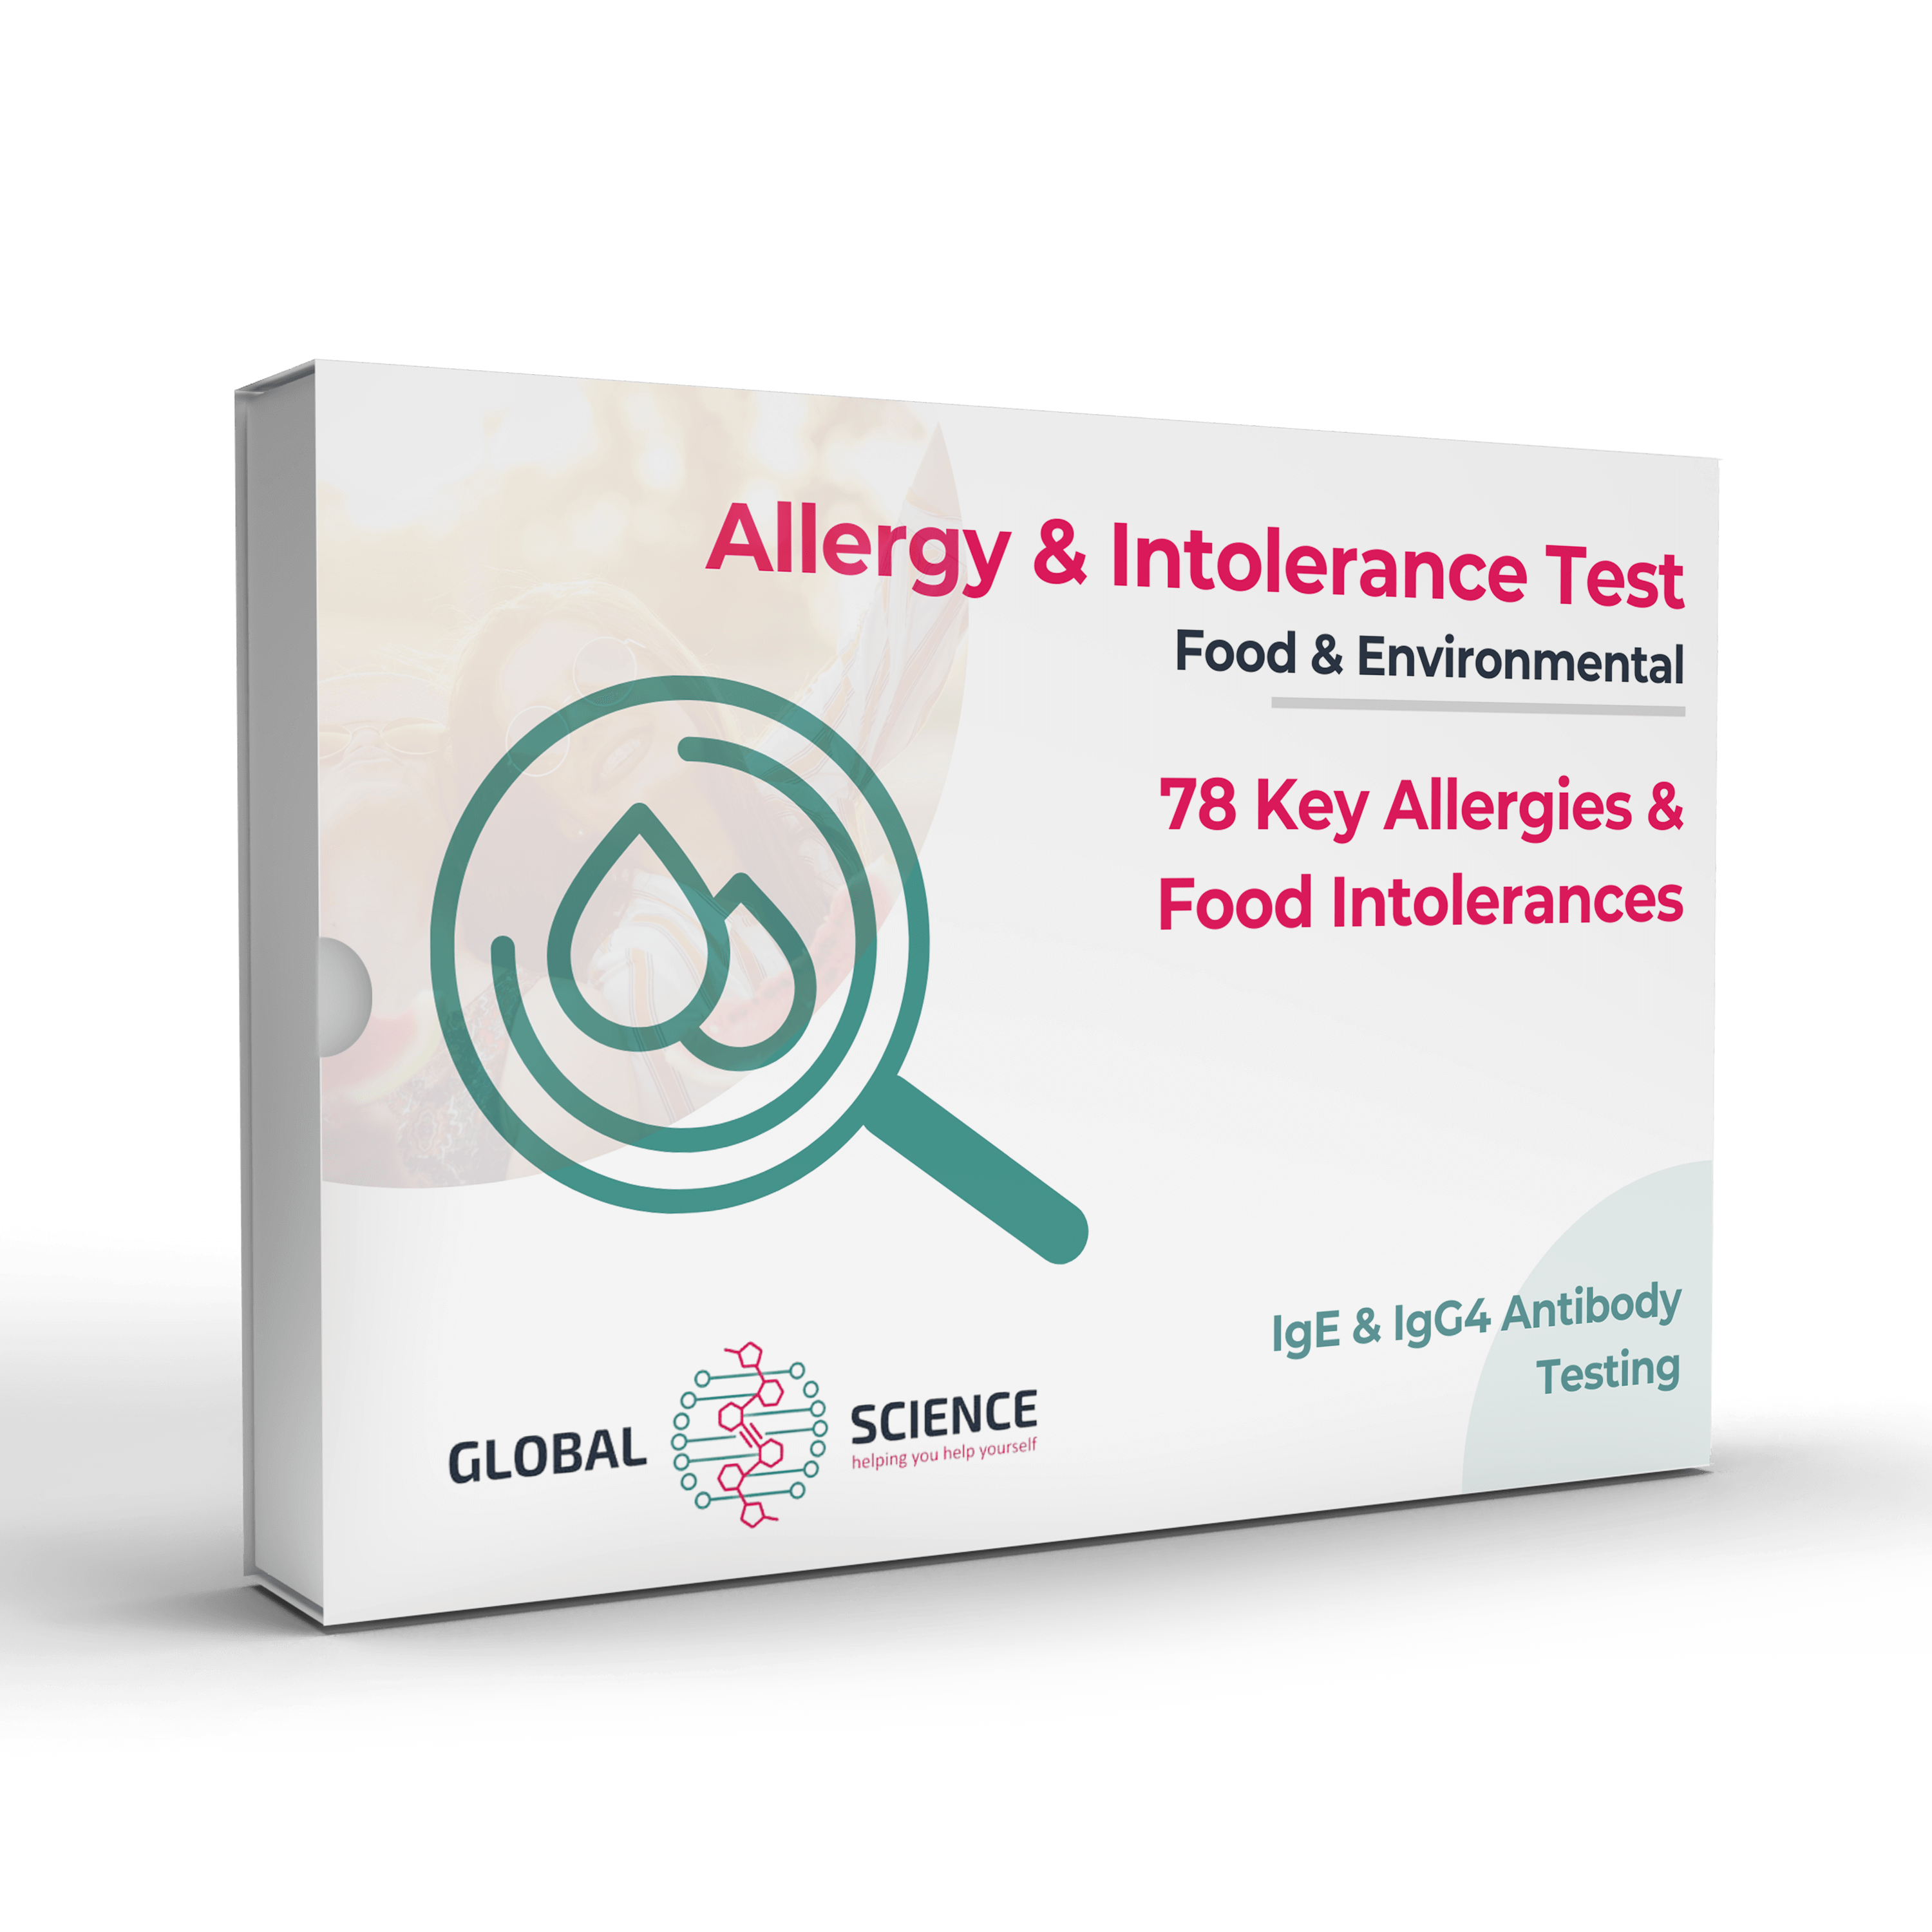 TMI TMA Allergy and Intolerance Test - Food Allergy Facts